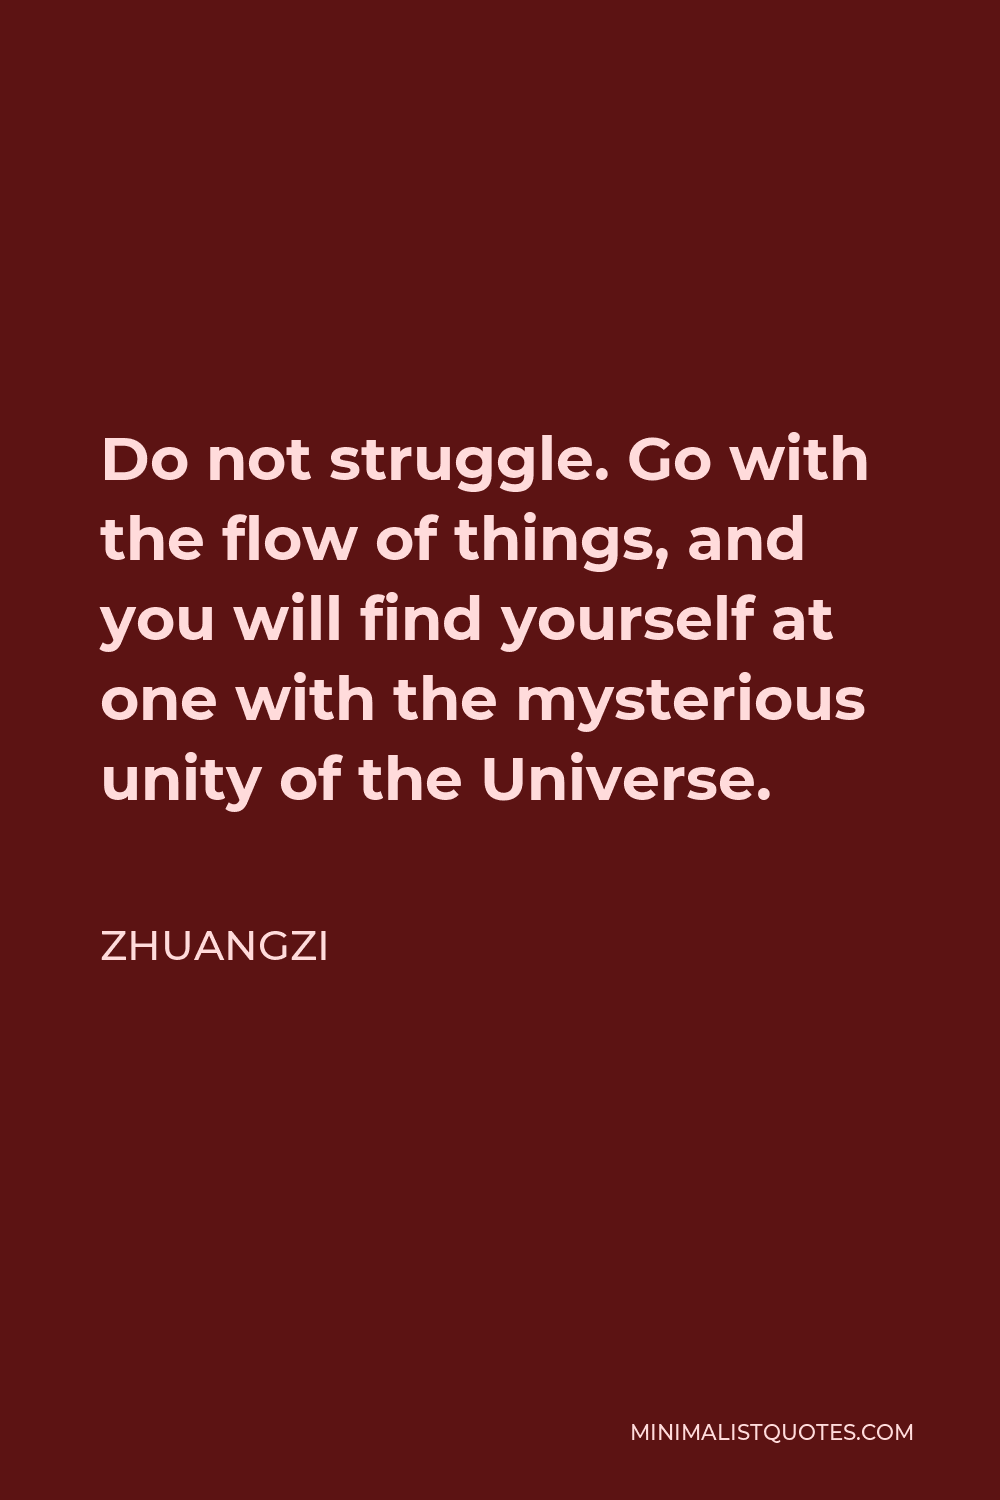 Zhuangzi Quote - Do not struggle. Go with the flow of things, and you will find yourself at one with the mysterious unity of the Universe.